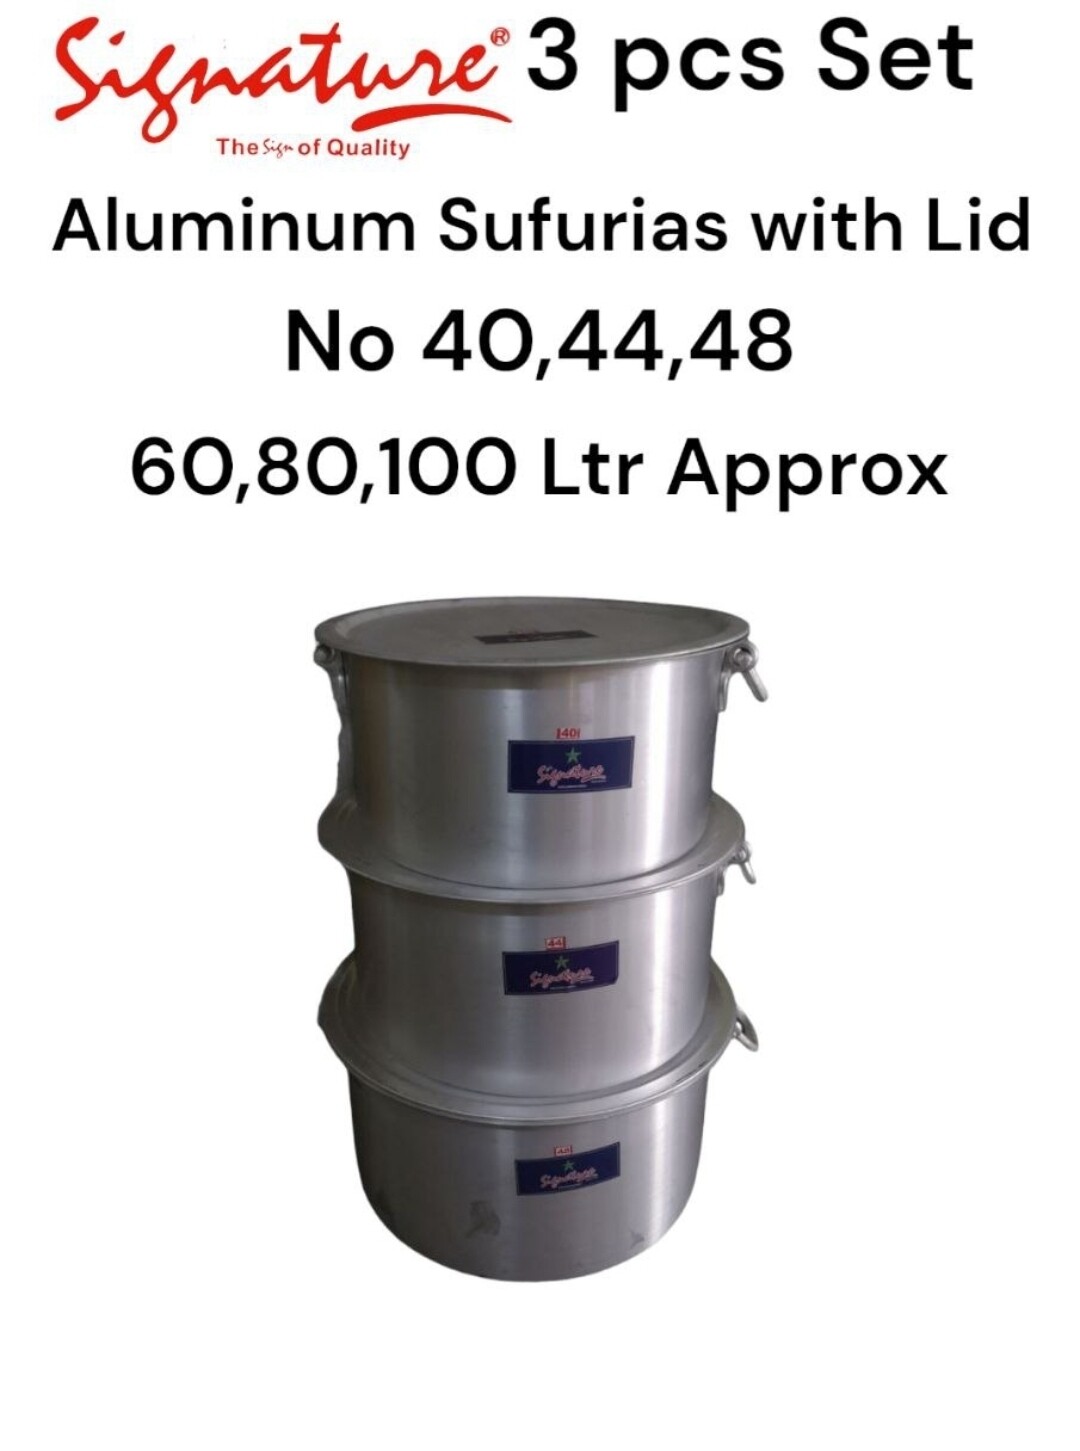 Signature heavy duty aluminium sufurias with lids and handles 3pcs set [60 80 and 100 Litres]